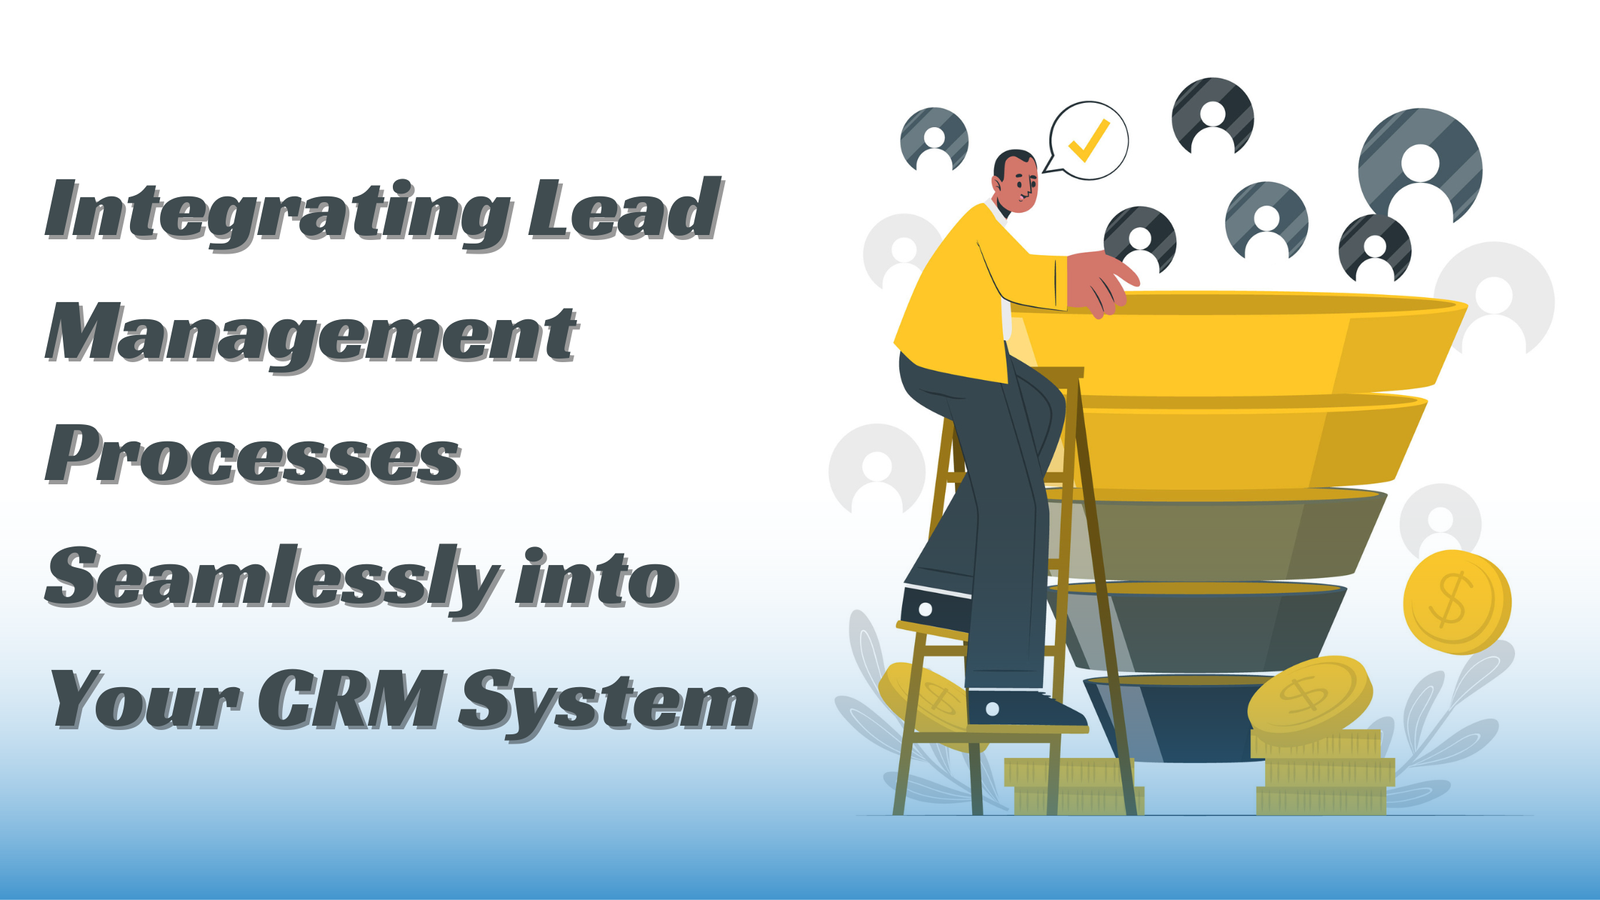 Tips on Integrating Lead Management Processes Seamlessly into Your CRM System